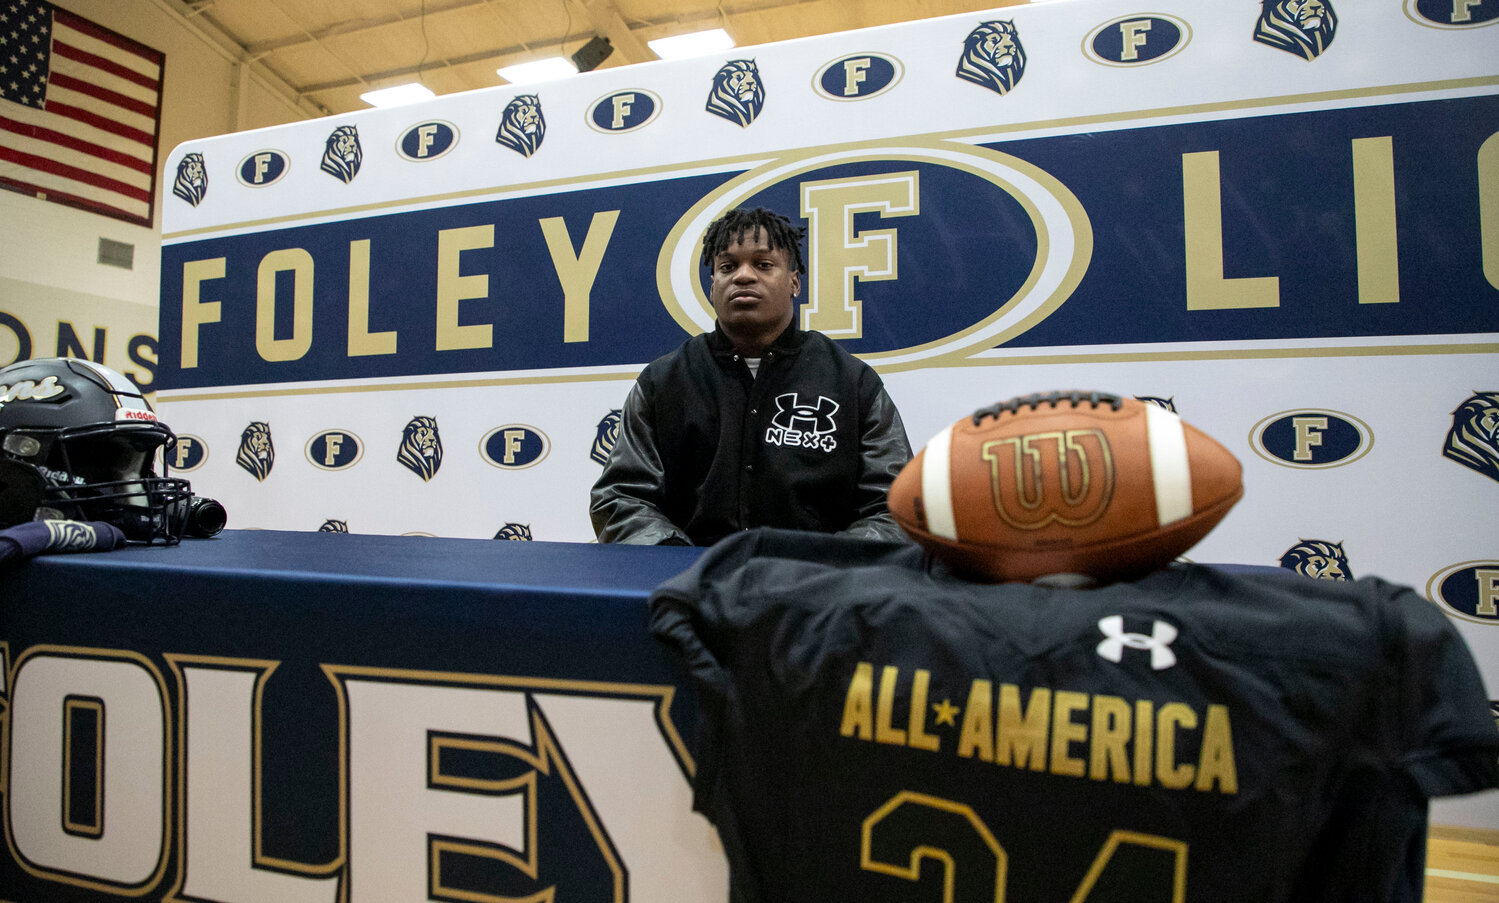 Foley High School hosted a ceremony on Friday, Nov. 17, where Lion senior Perry Thompson was presented his Under Armour All-American jersey before the game scheduled for Jan. 3, 2024. The receiver will mark just the second Foley representative at the Under Armour All-America Game after Julio Jones appeared in 2008’s inaugural contest.